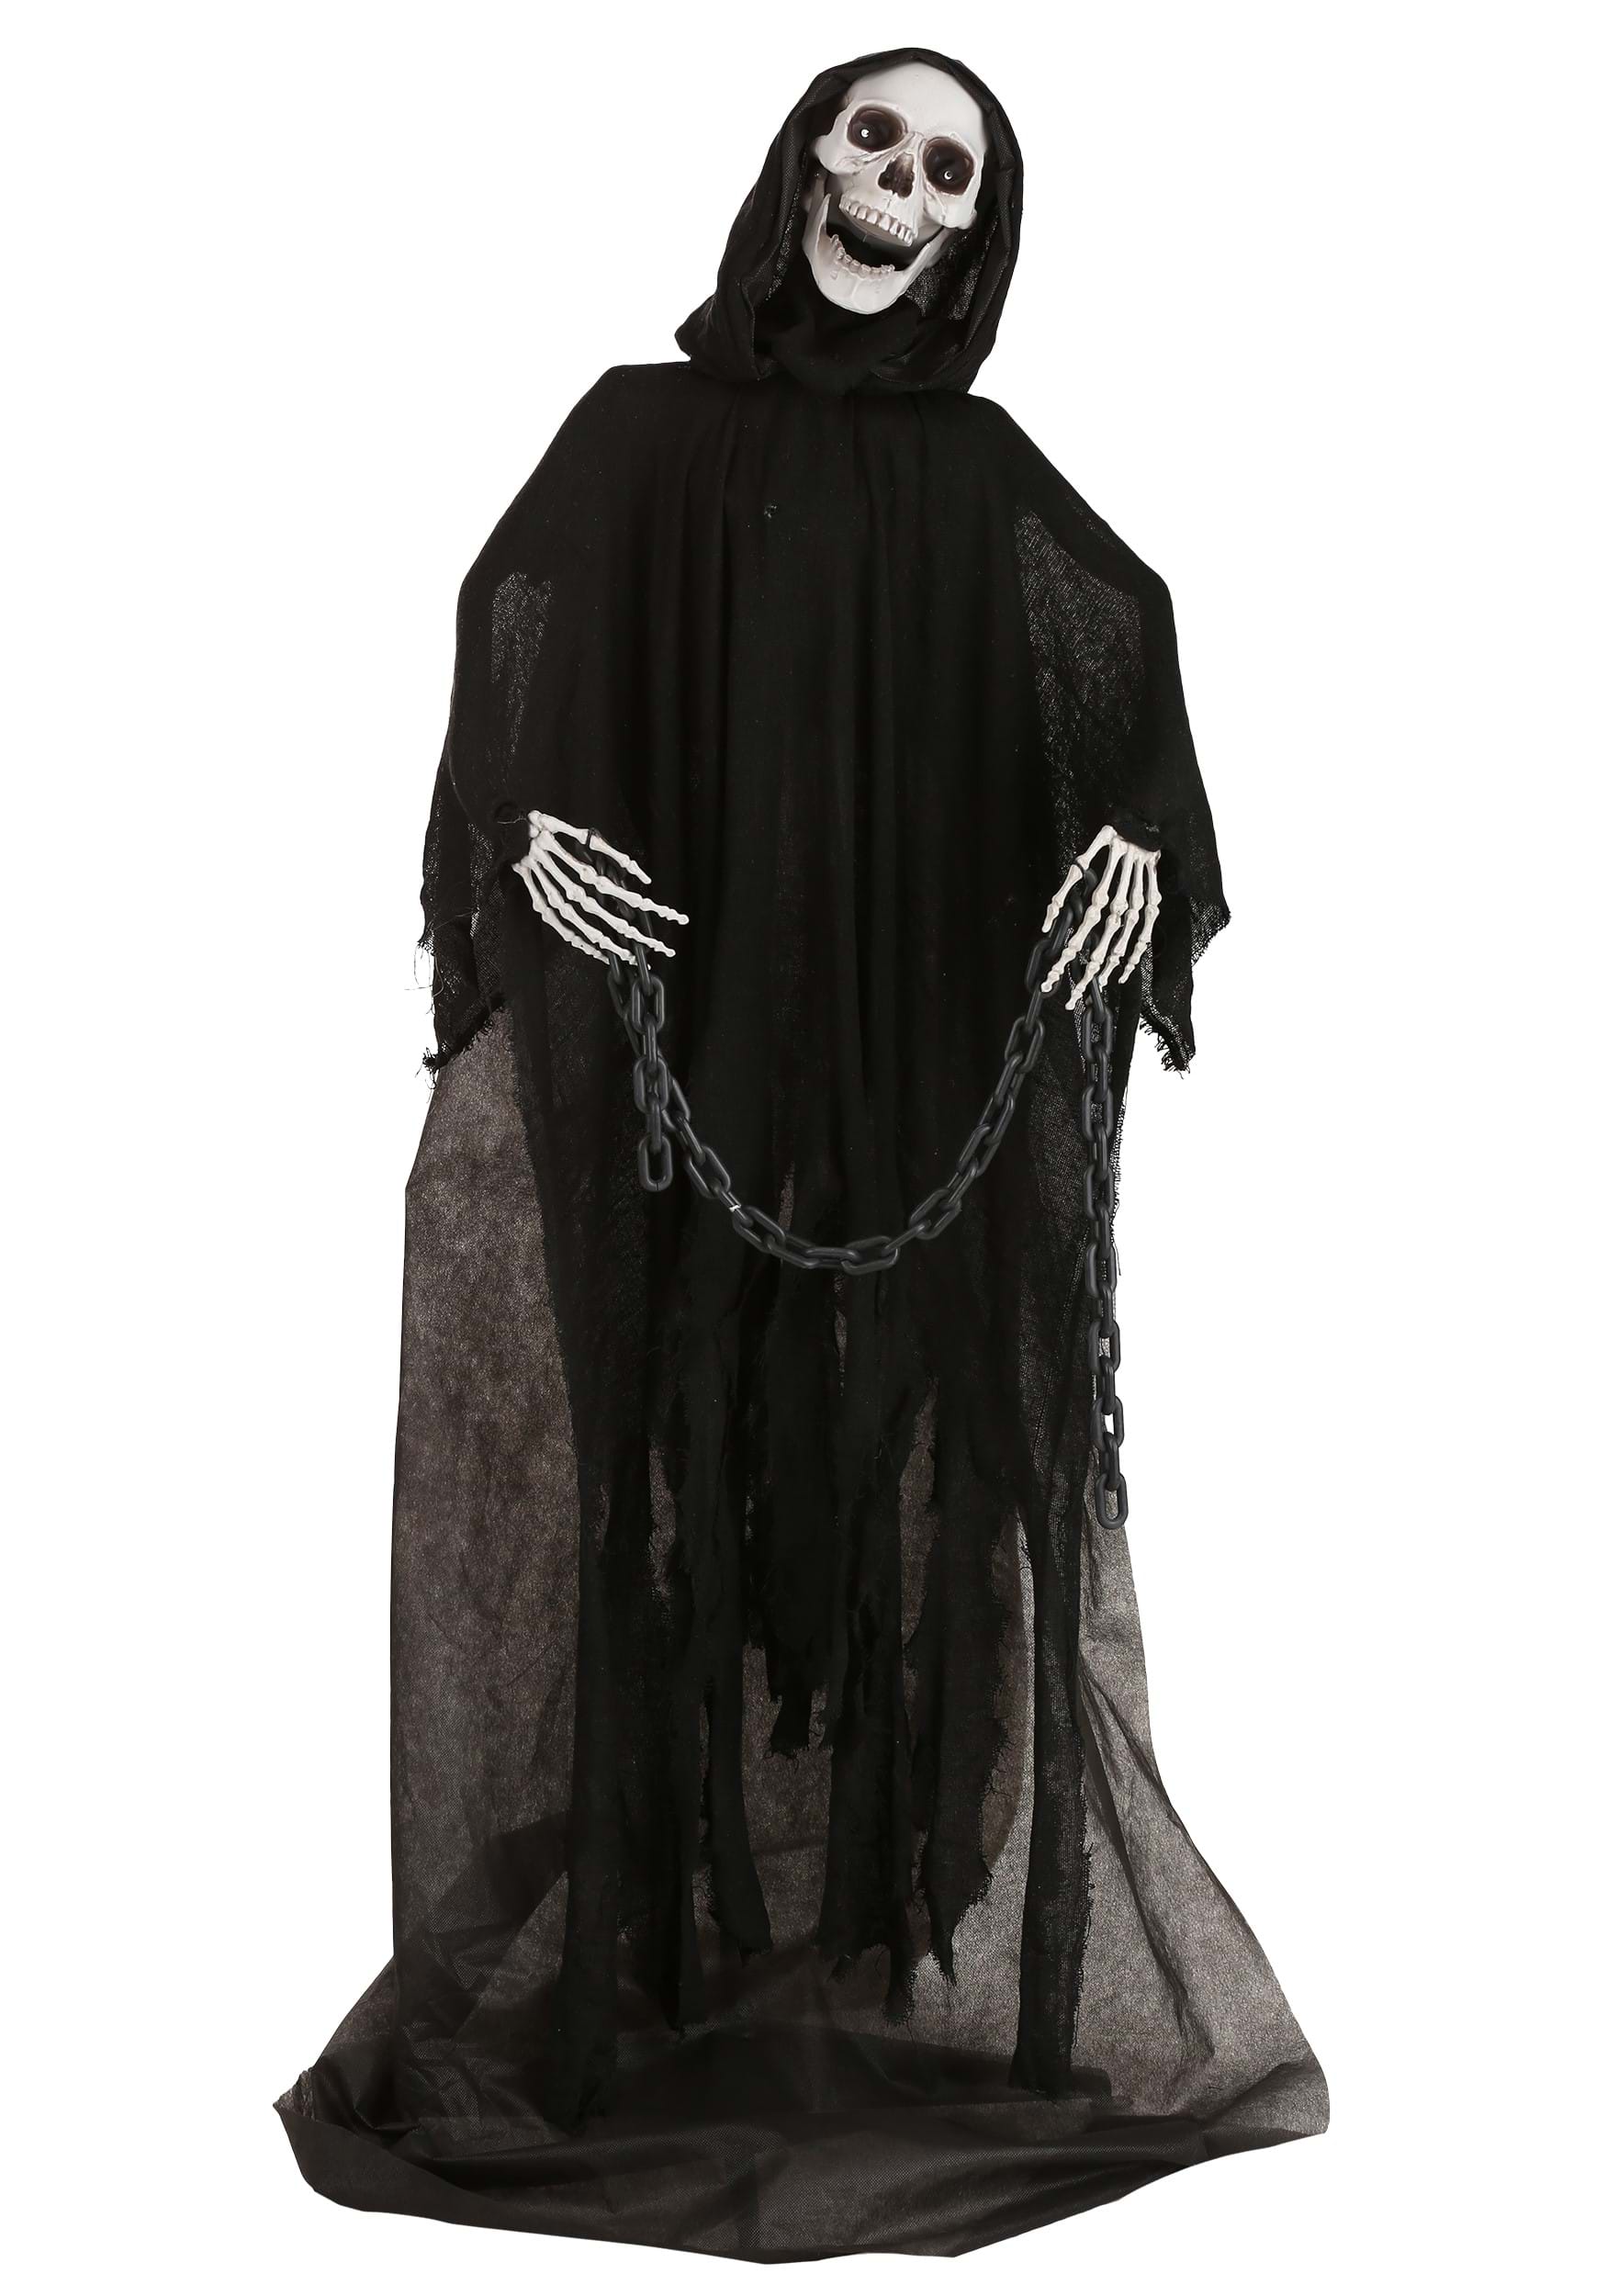 Photos - Other interior and decor UP3D FUN Costumes 5 Foot Animated Light Up Reaper Halloween Prop | Skeleton Dec 